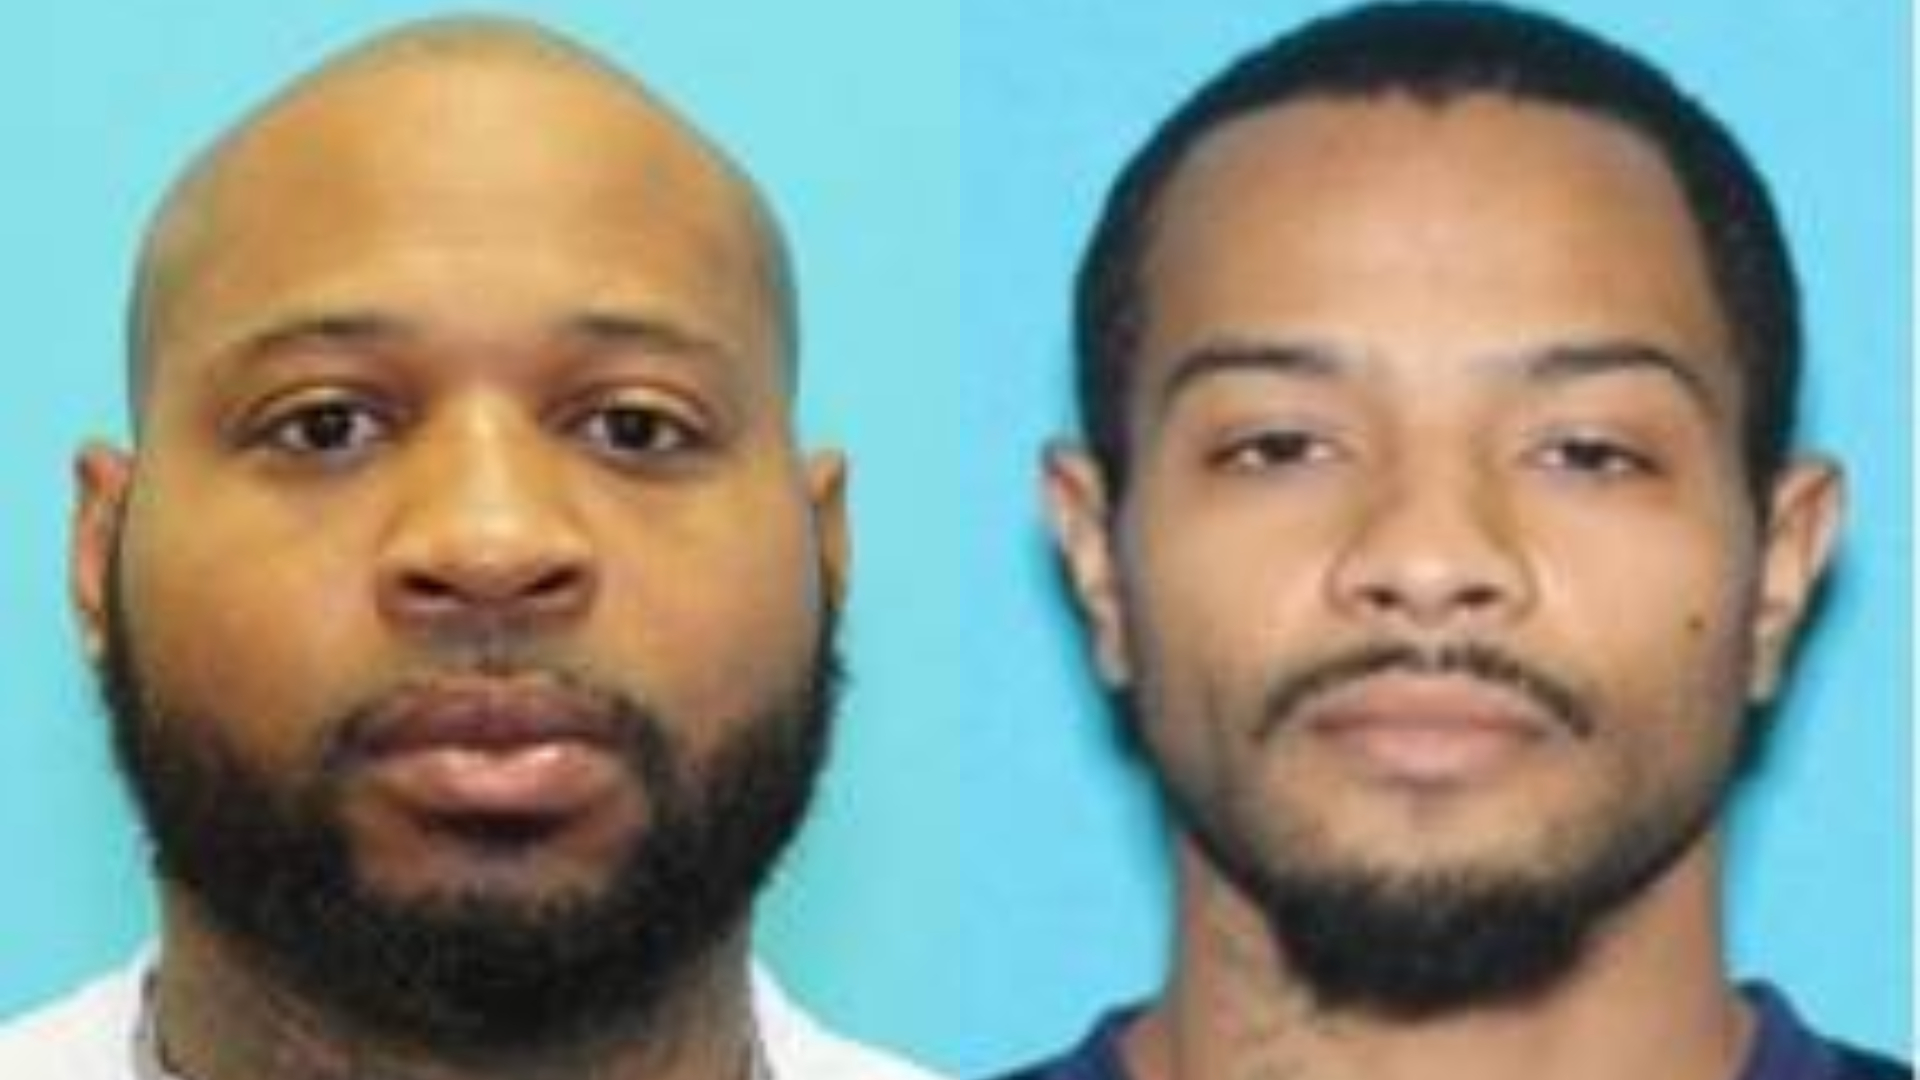 Gang member, sex offender added to Texas 10 most wanted lists